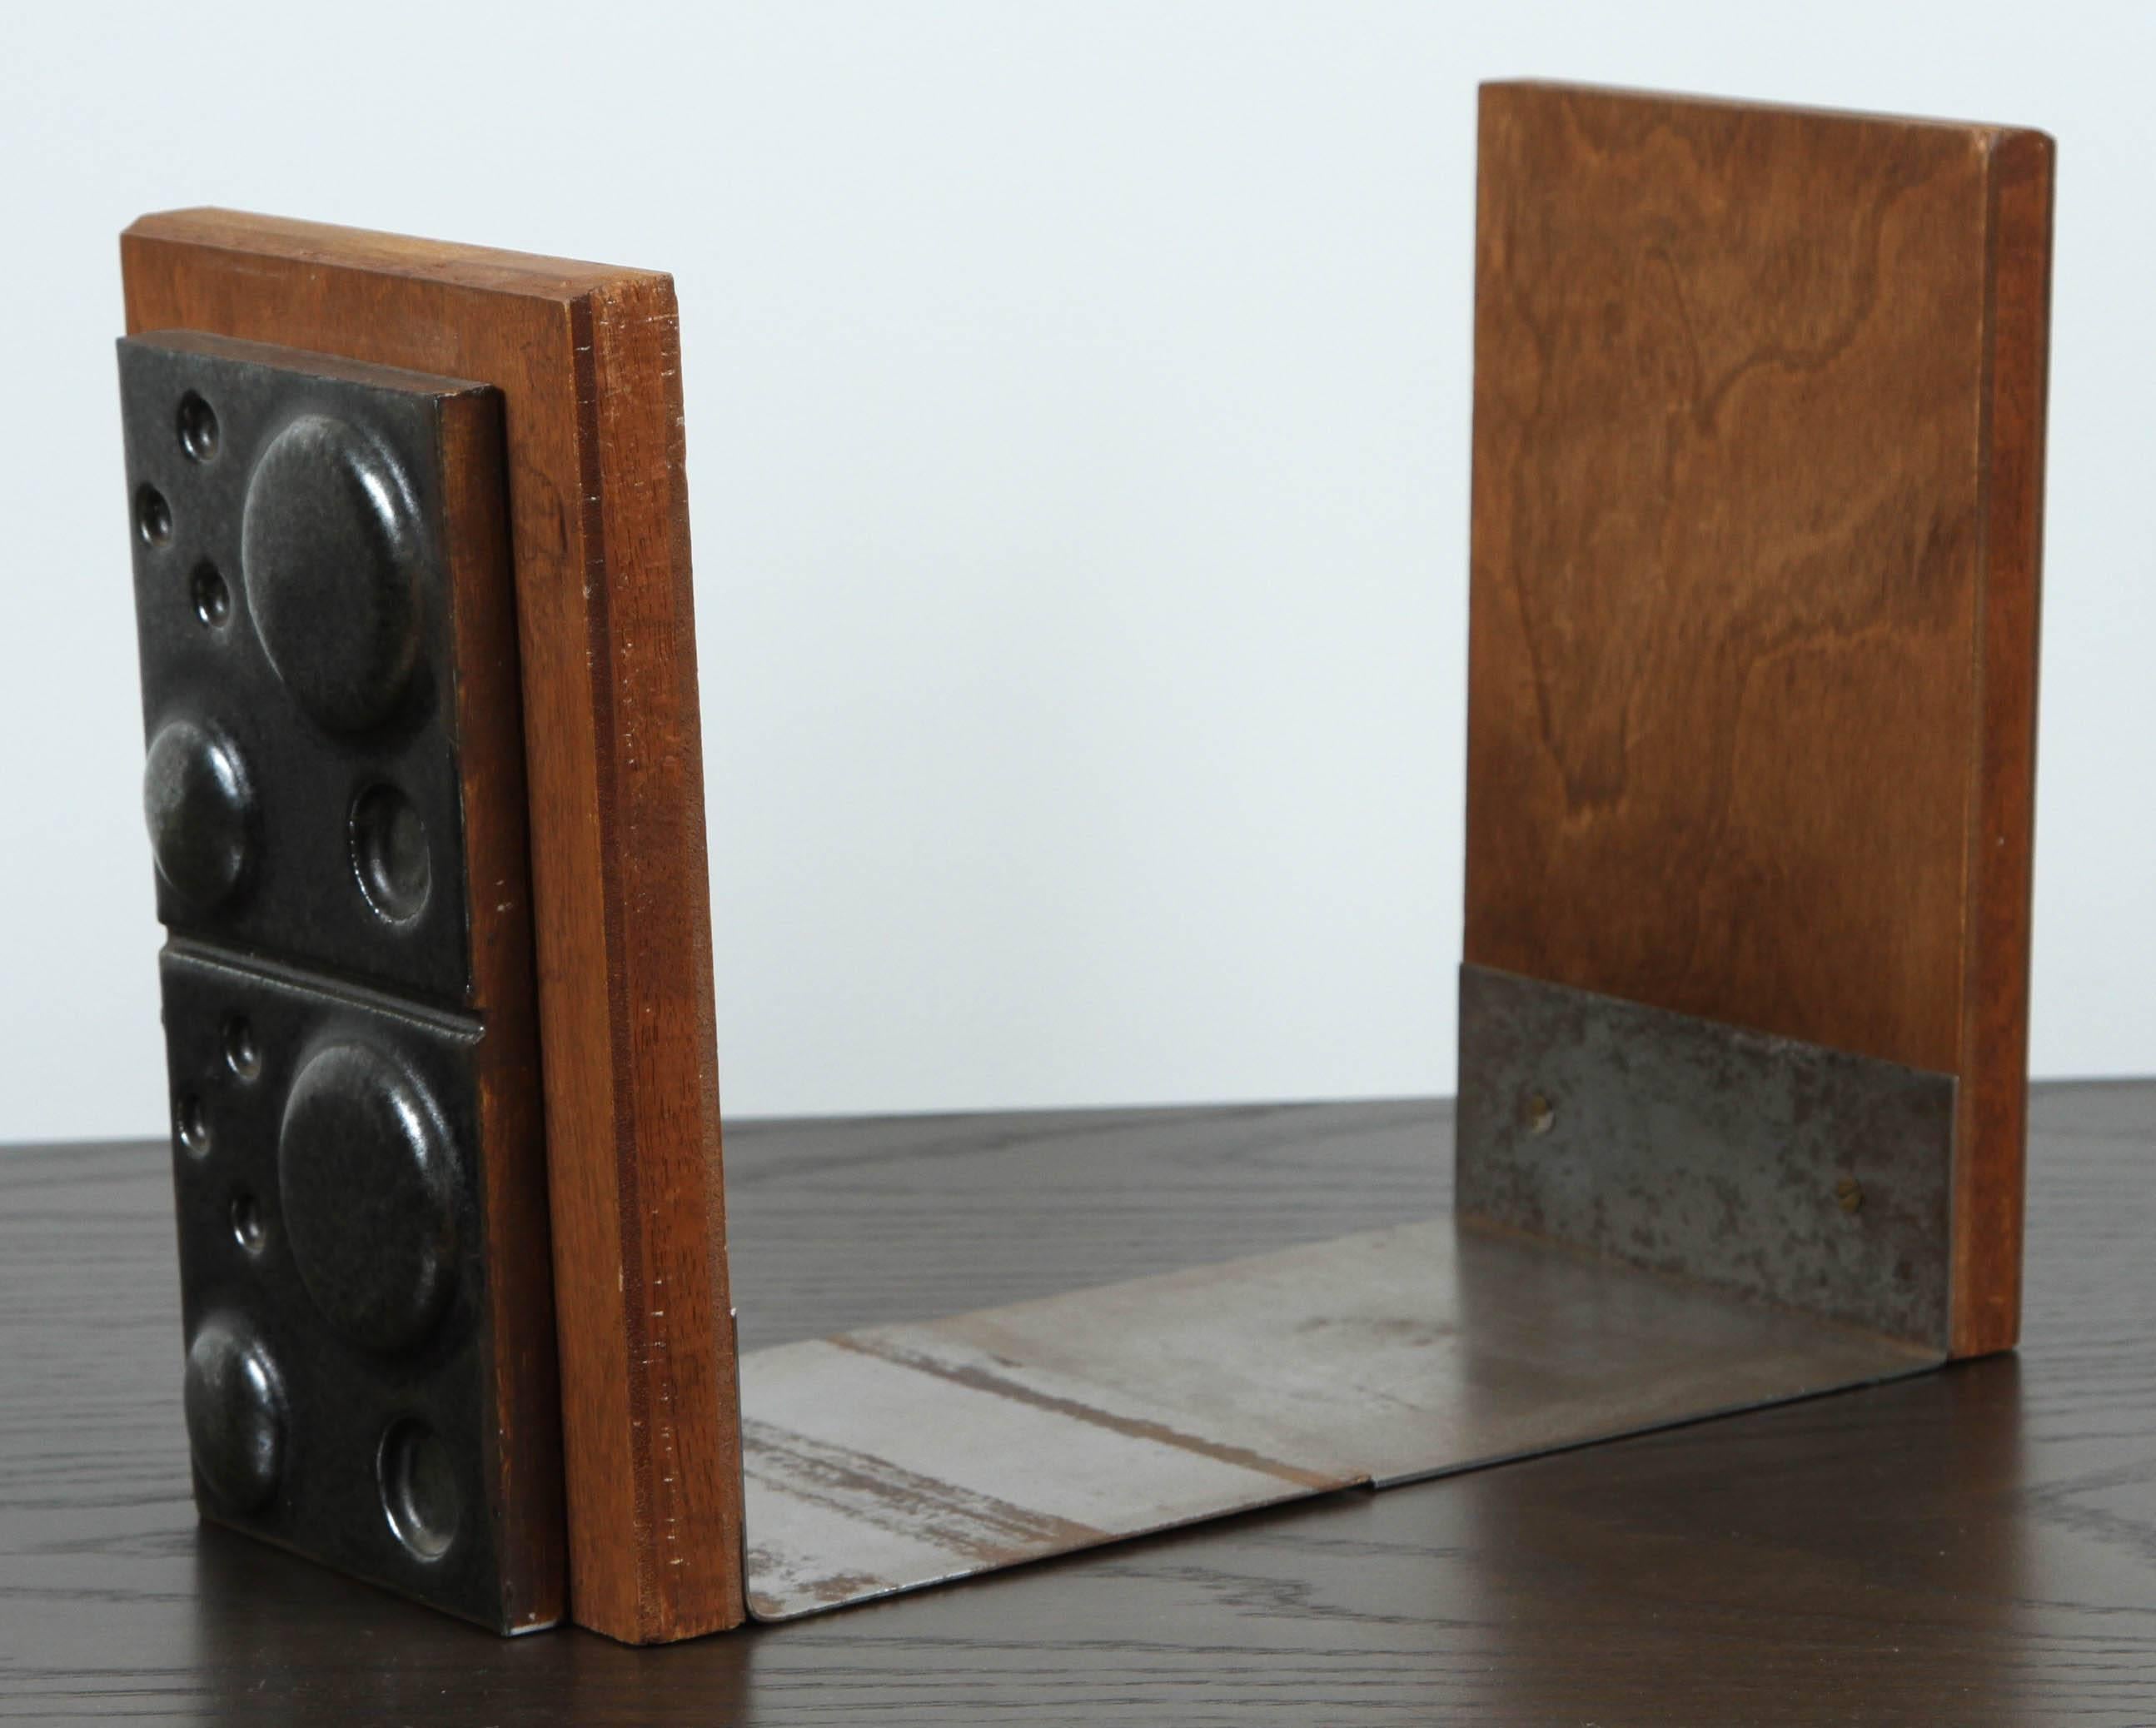 Black ceramic and teak bookends by Martz.